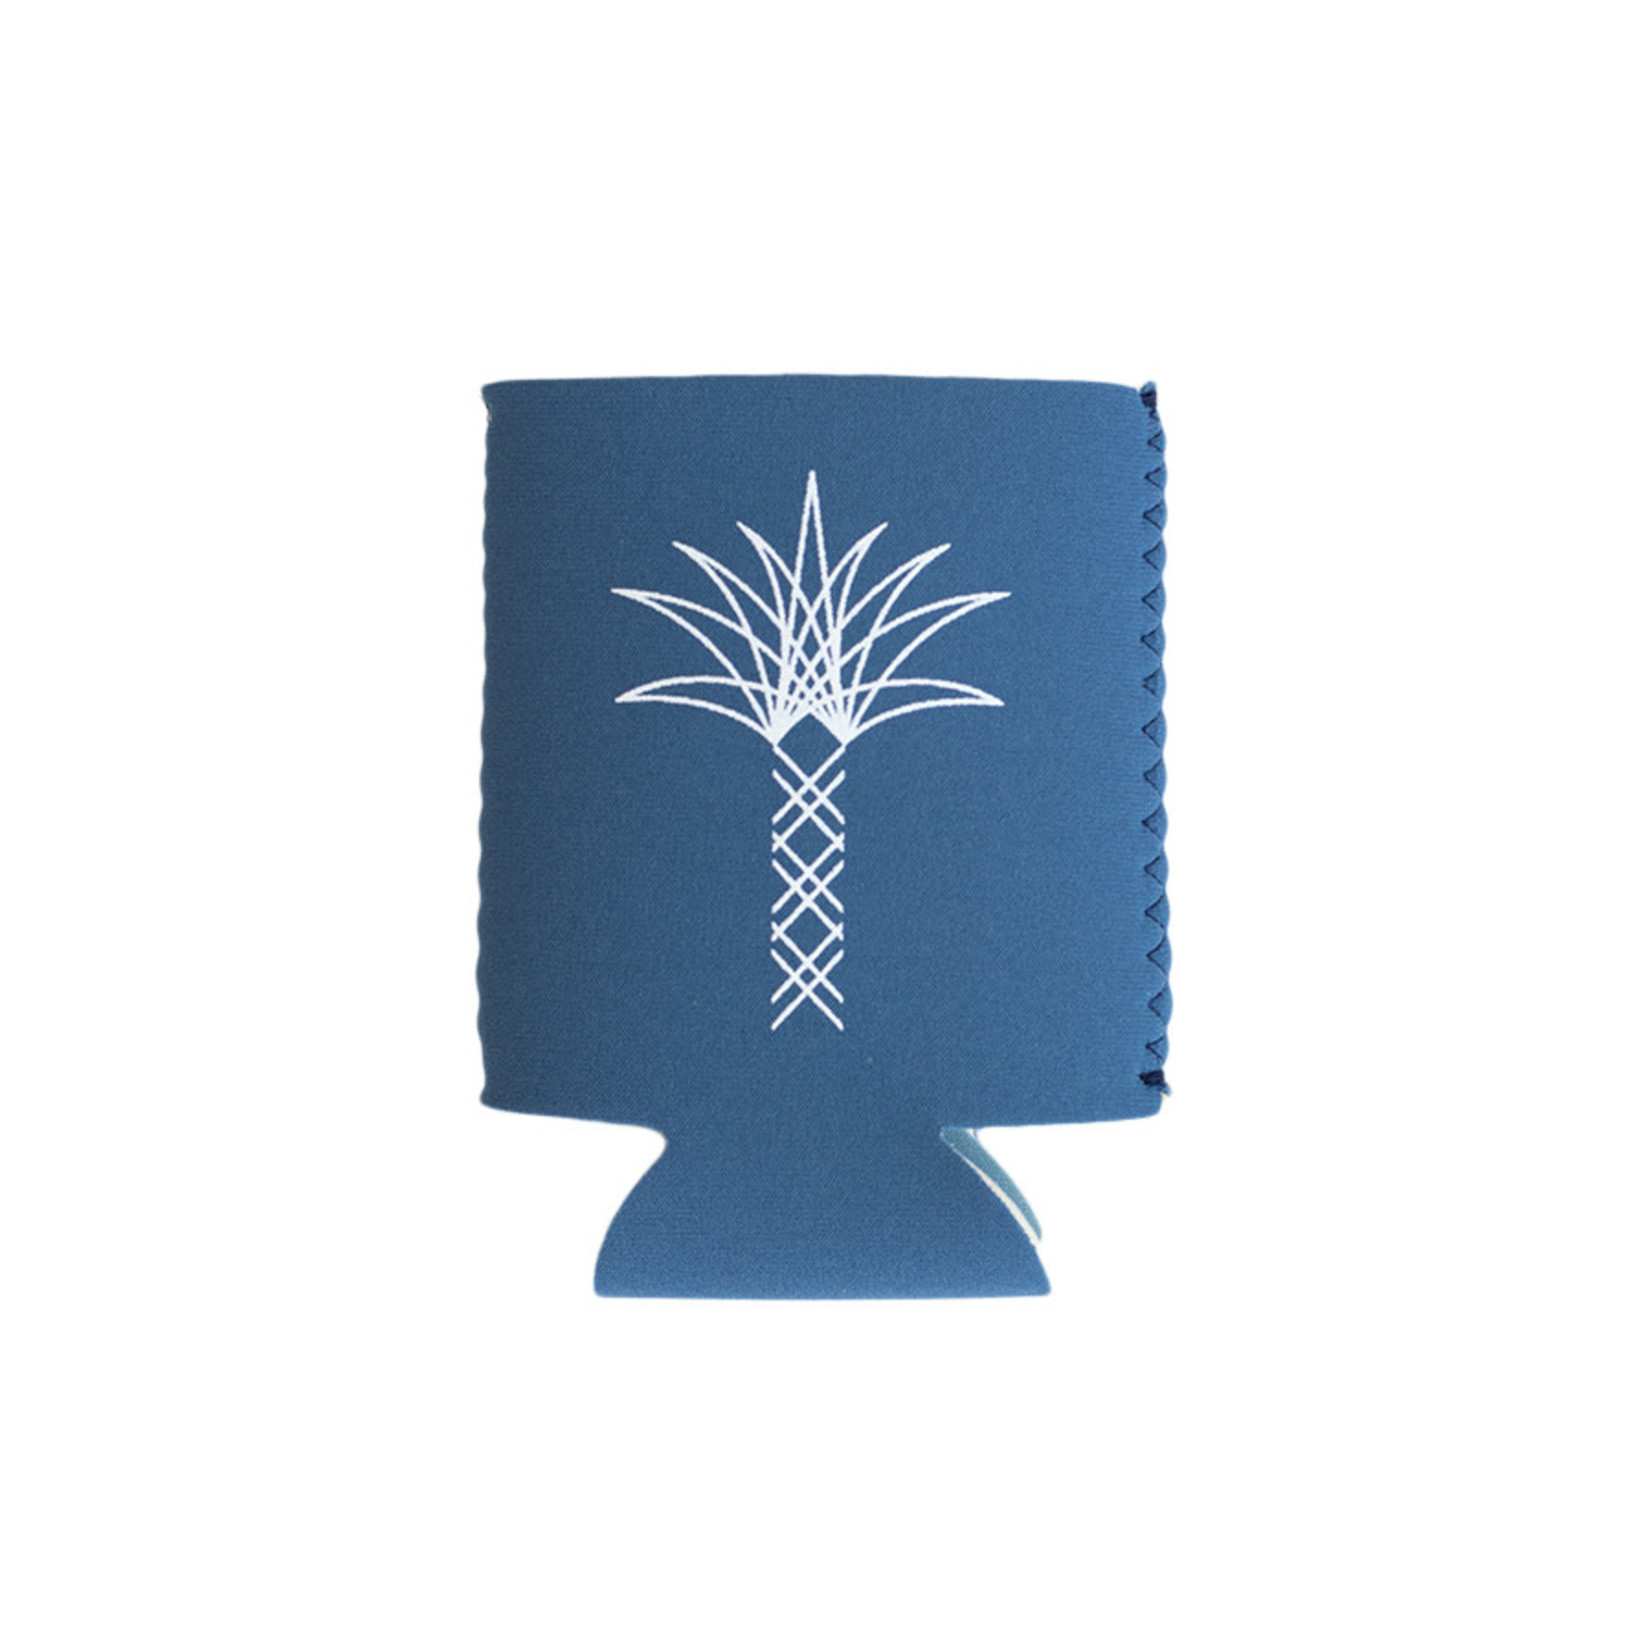 The Salty Palm TSP Can Koozie